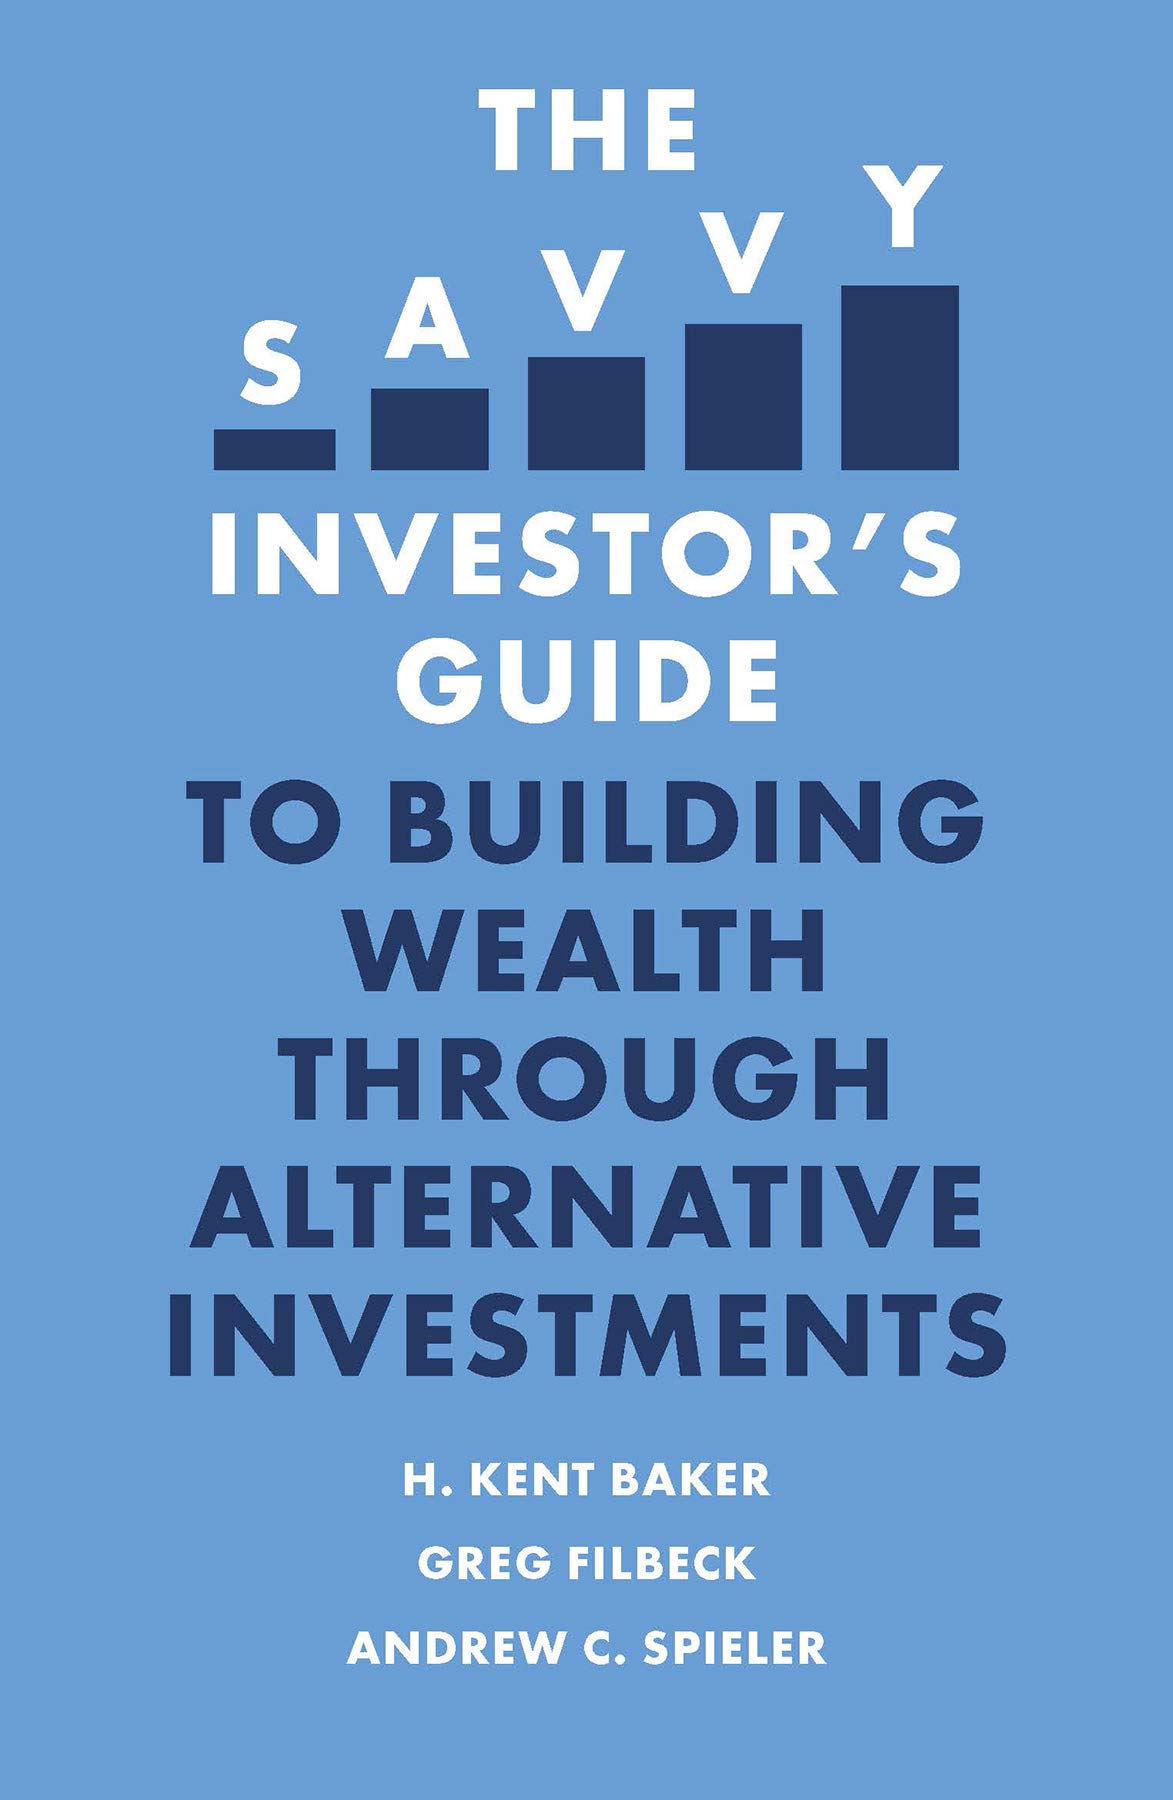 The Savvy Investor\'s Guide to Building Wealth Through Alternative Investments | H. Kent Baker, Greg Filbeck, Andrew C. Spieler